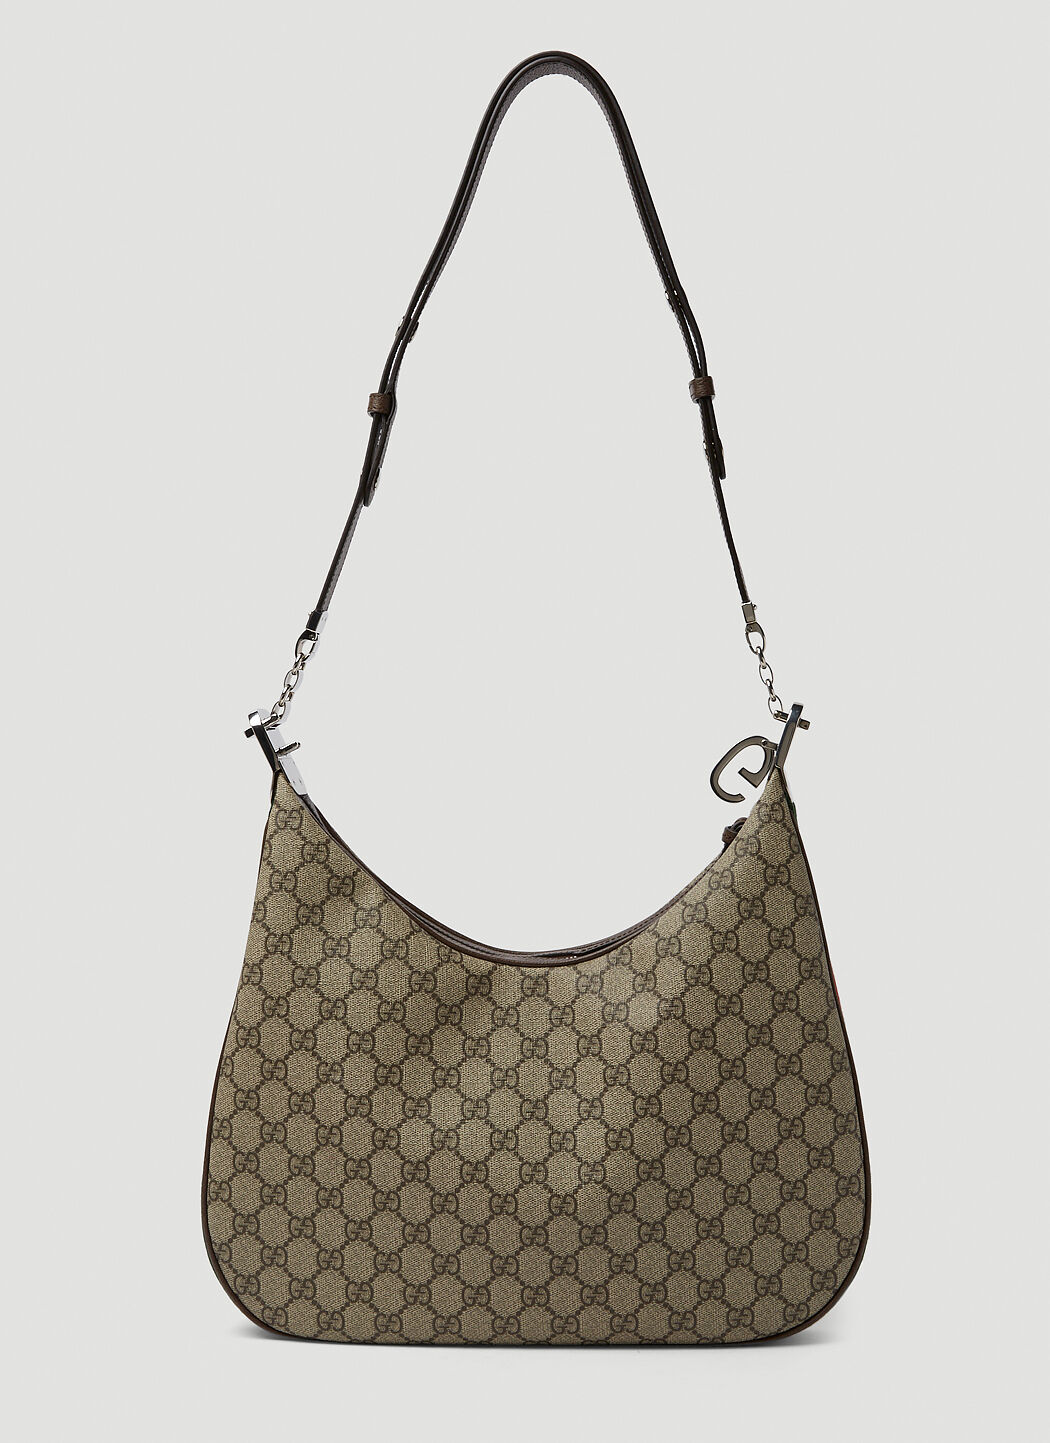 Buy Gucci Bag Online In India - Etsy India